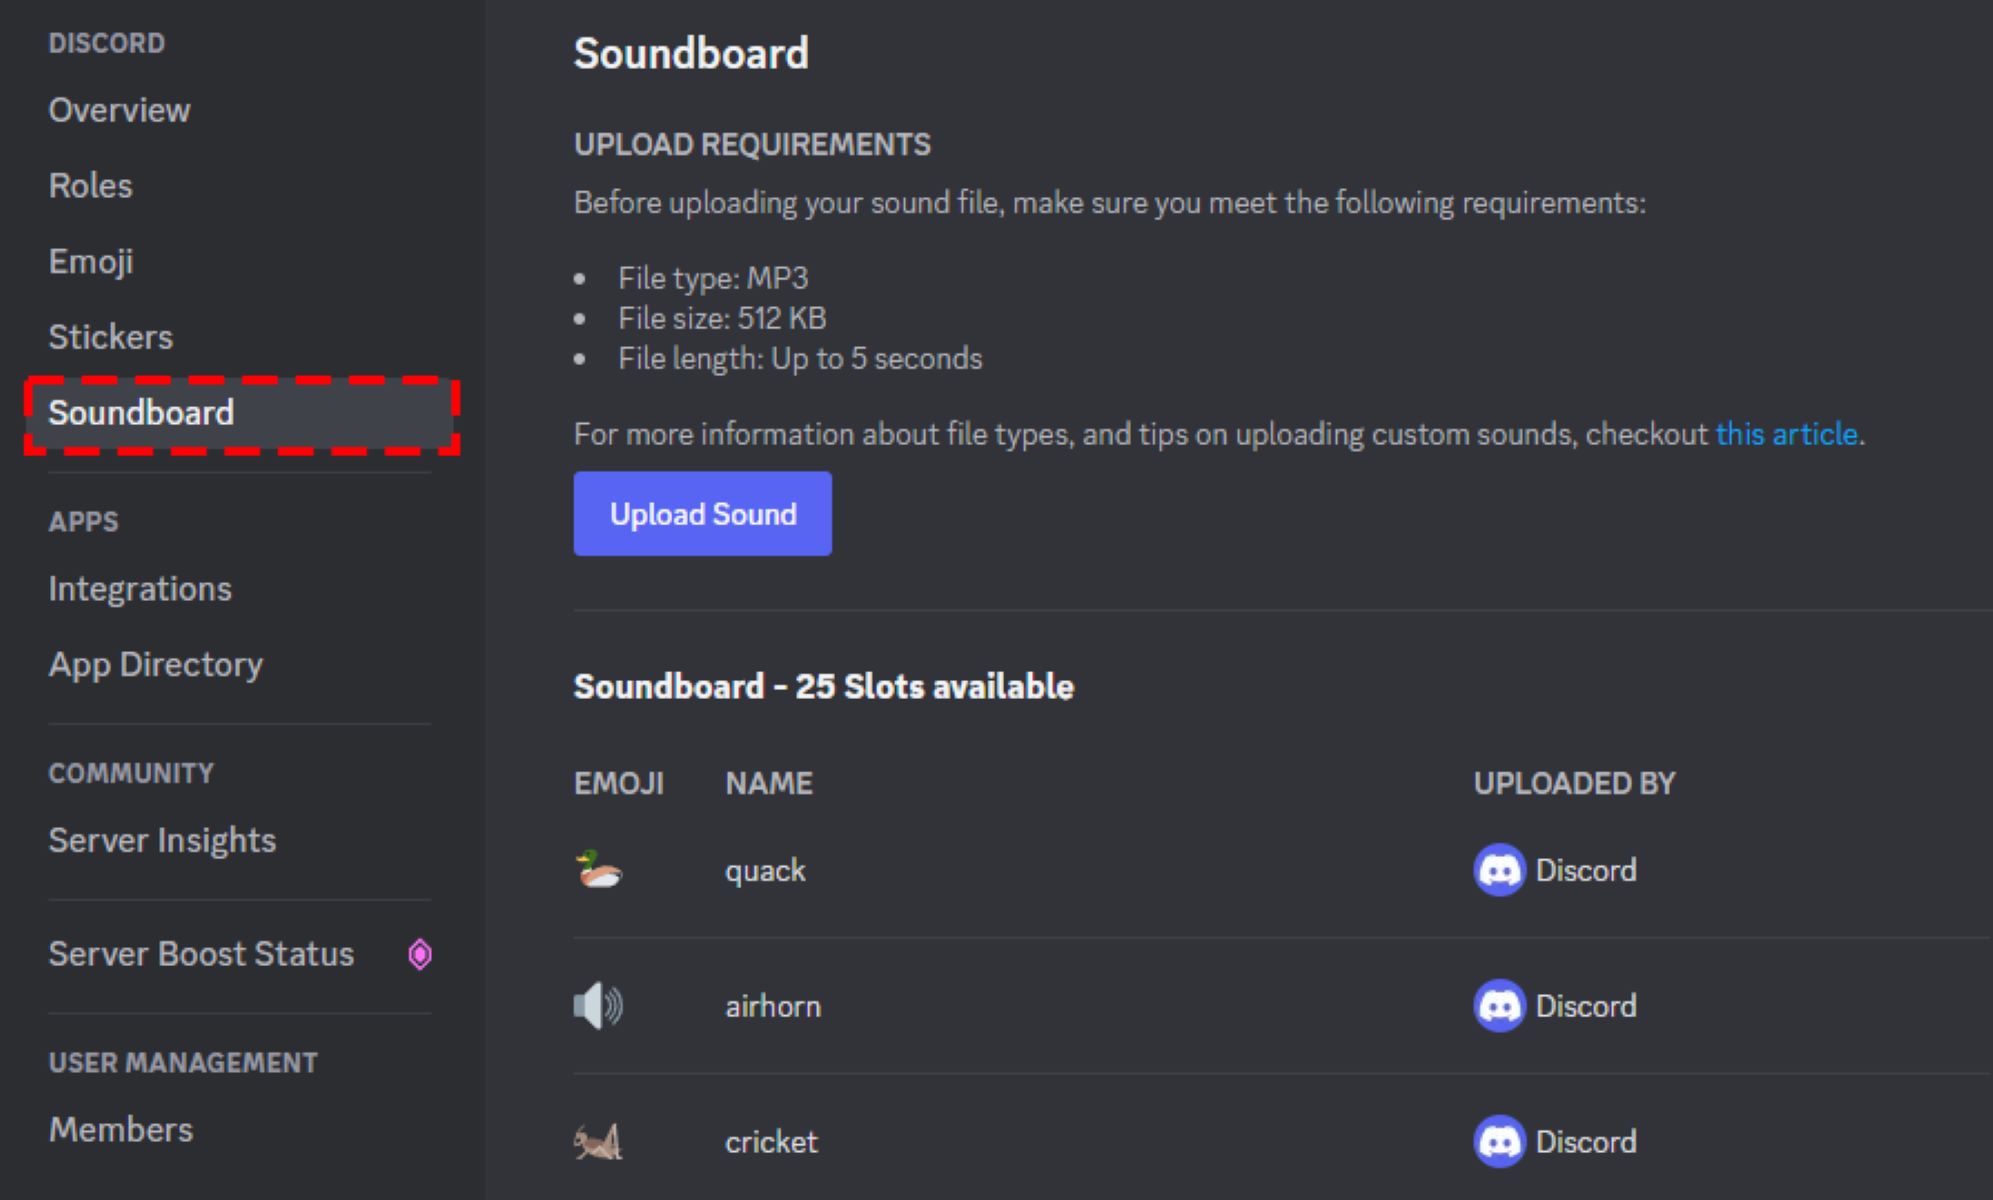 How To Get A Soundboard For Discord